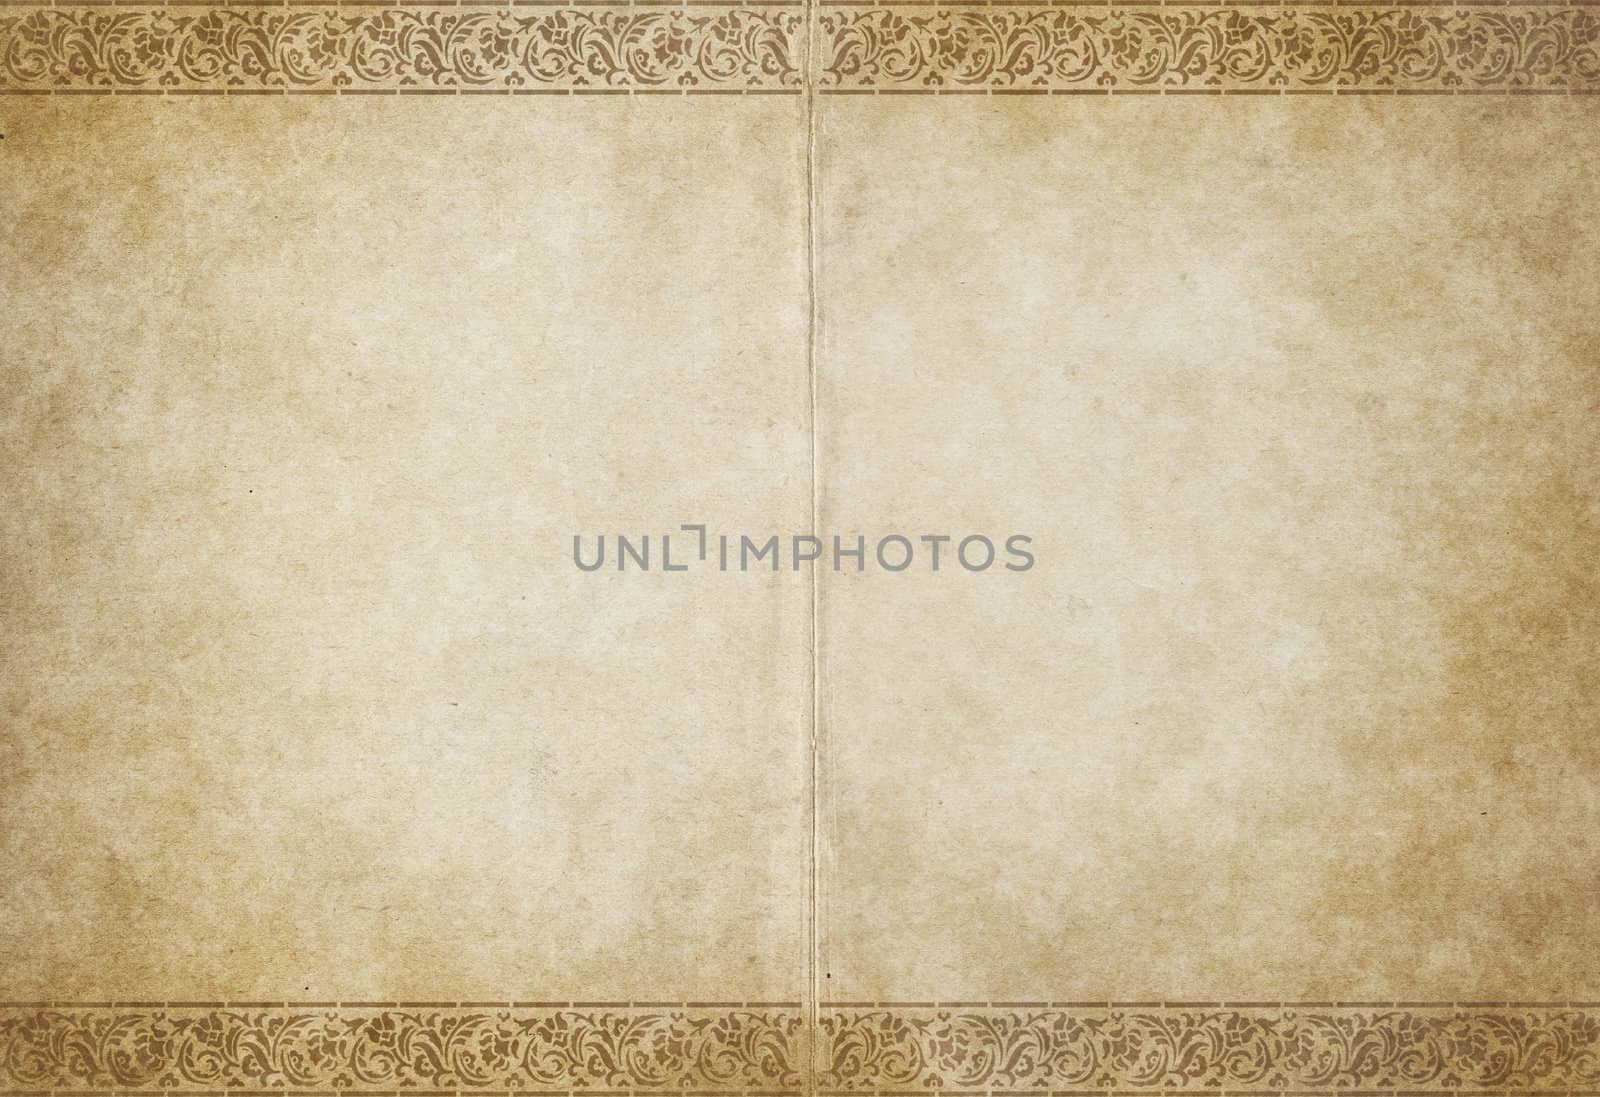 great background image of old parchment paper